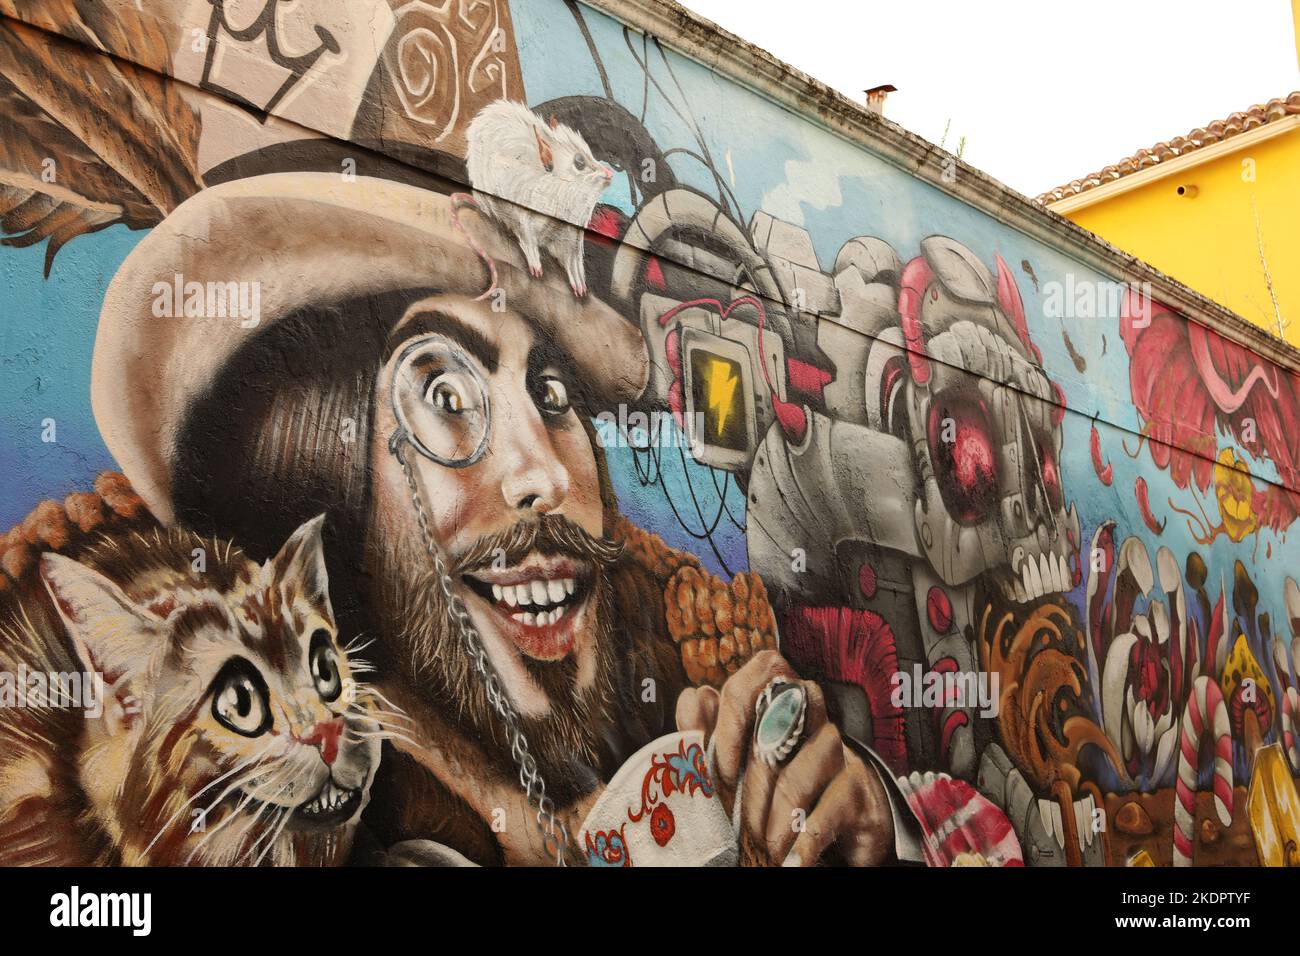 A mural on a wall in old town, Lagos, Algarve, Portugal Stock Photo